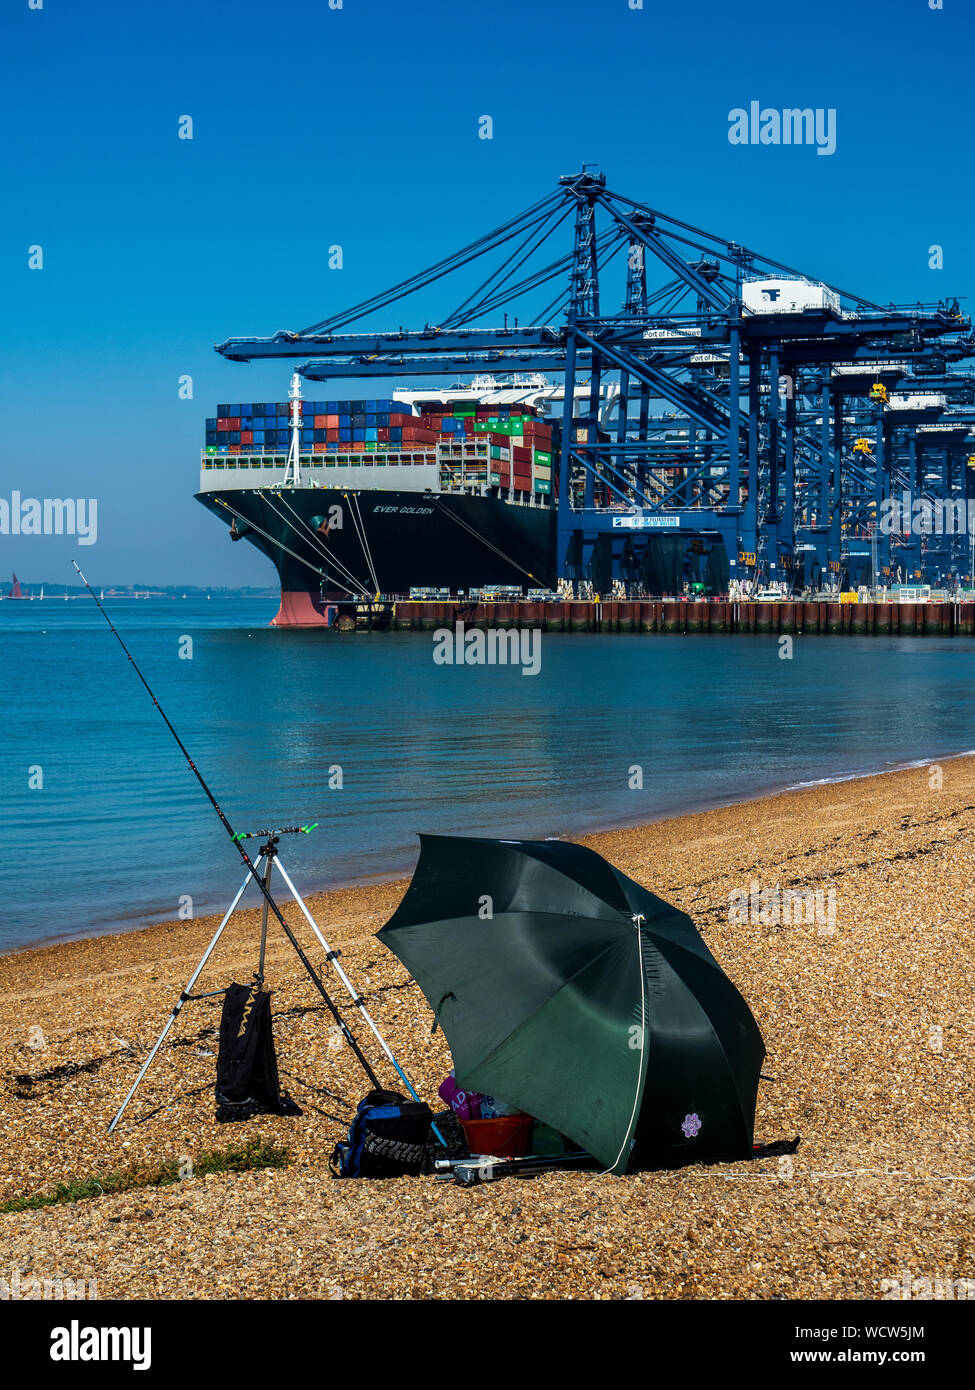 Felixstowe Container Port - The Ever Golden Container Ship unloads cargo at the Port of Felixstowe UK watched by a beach fisherman. Stock Photo